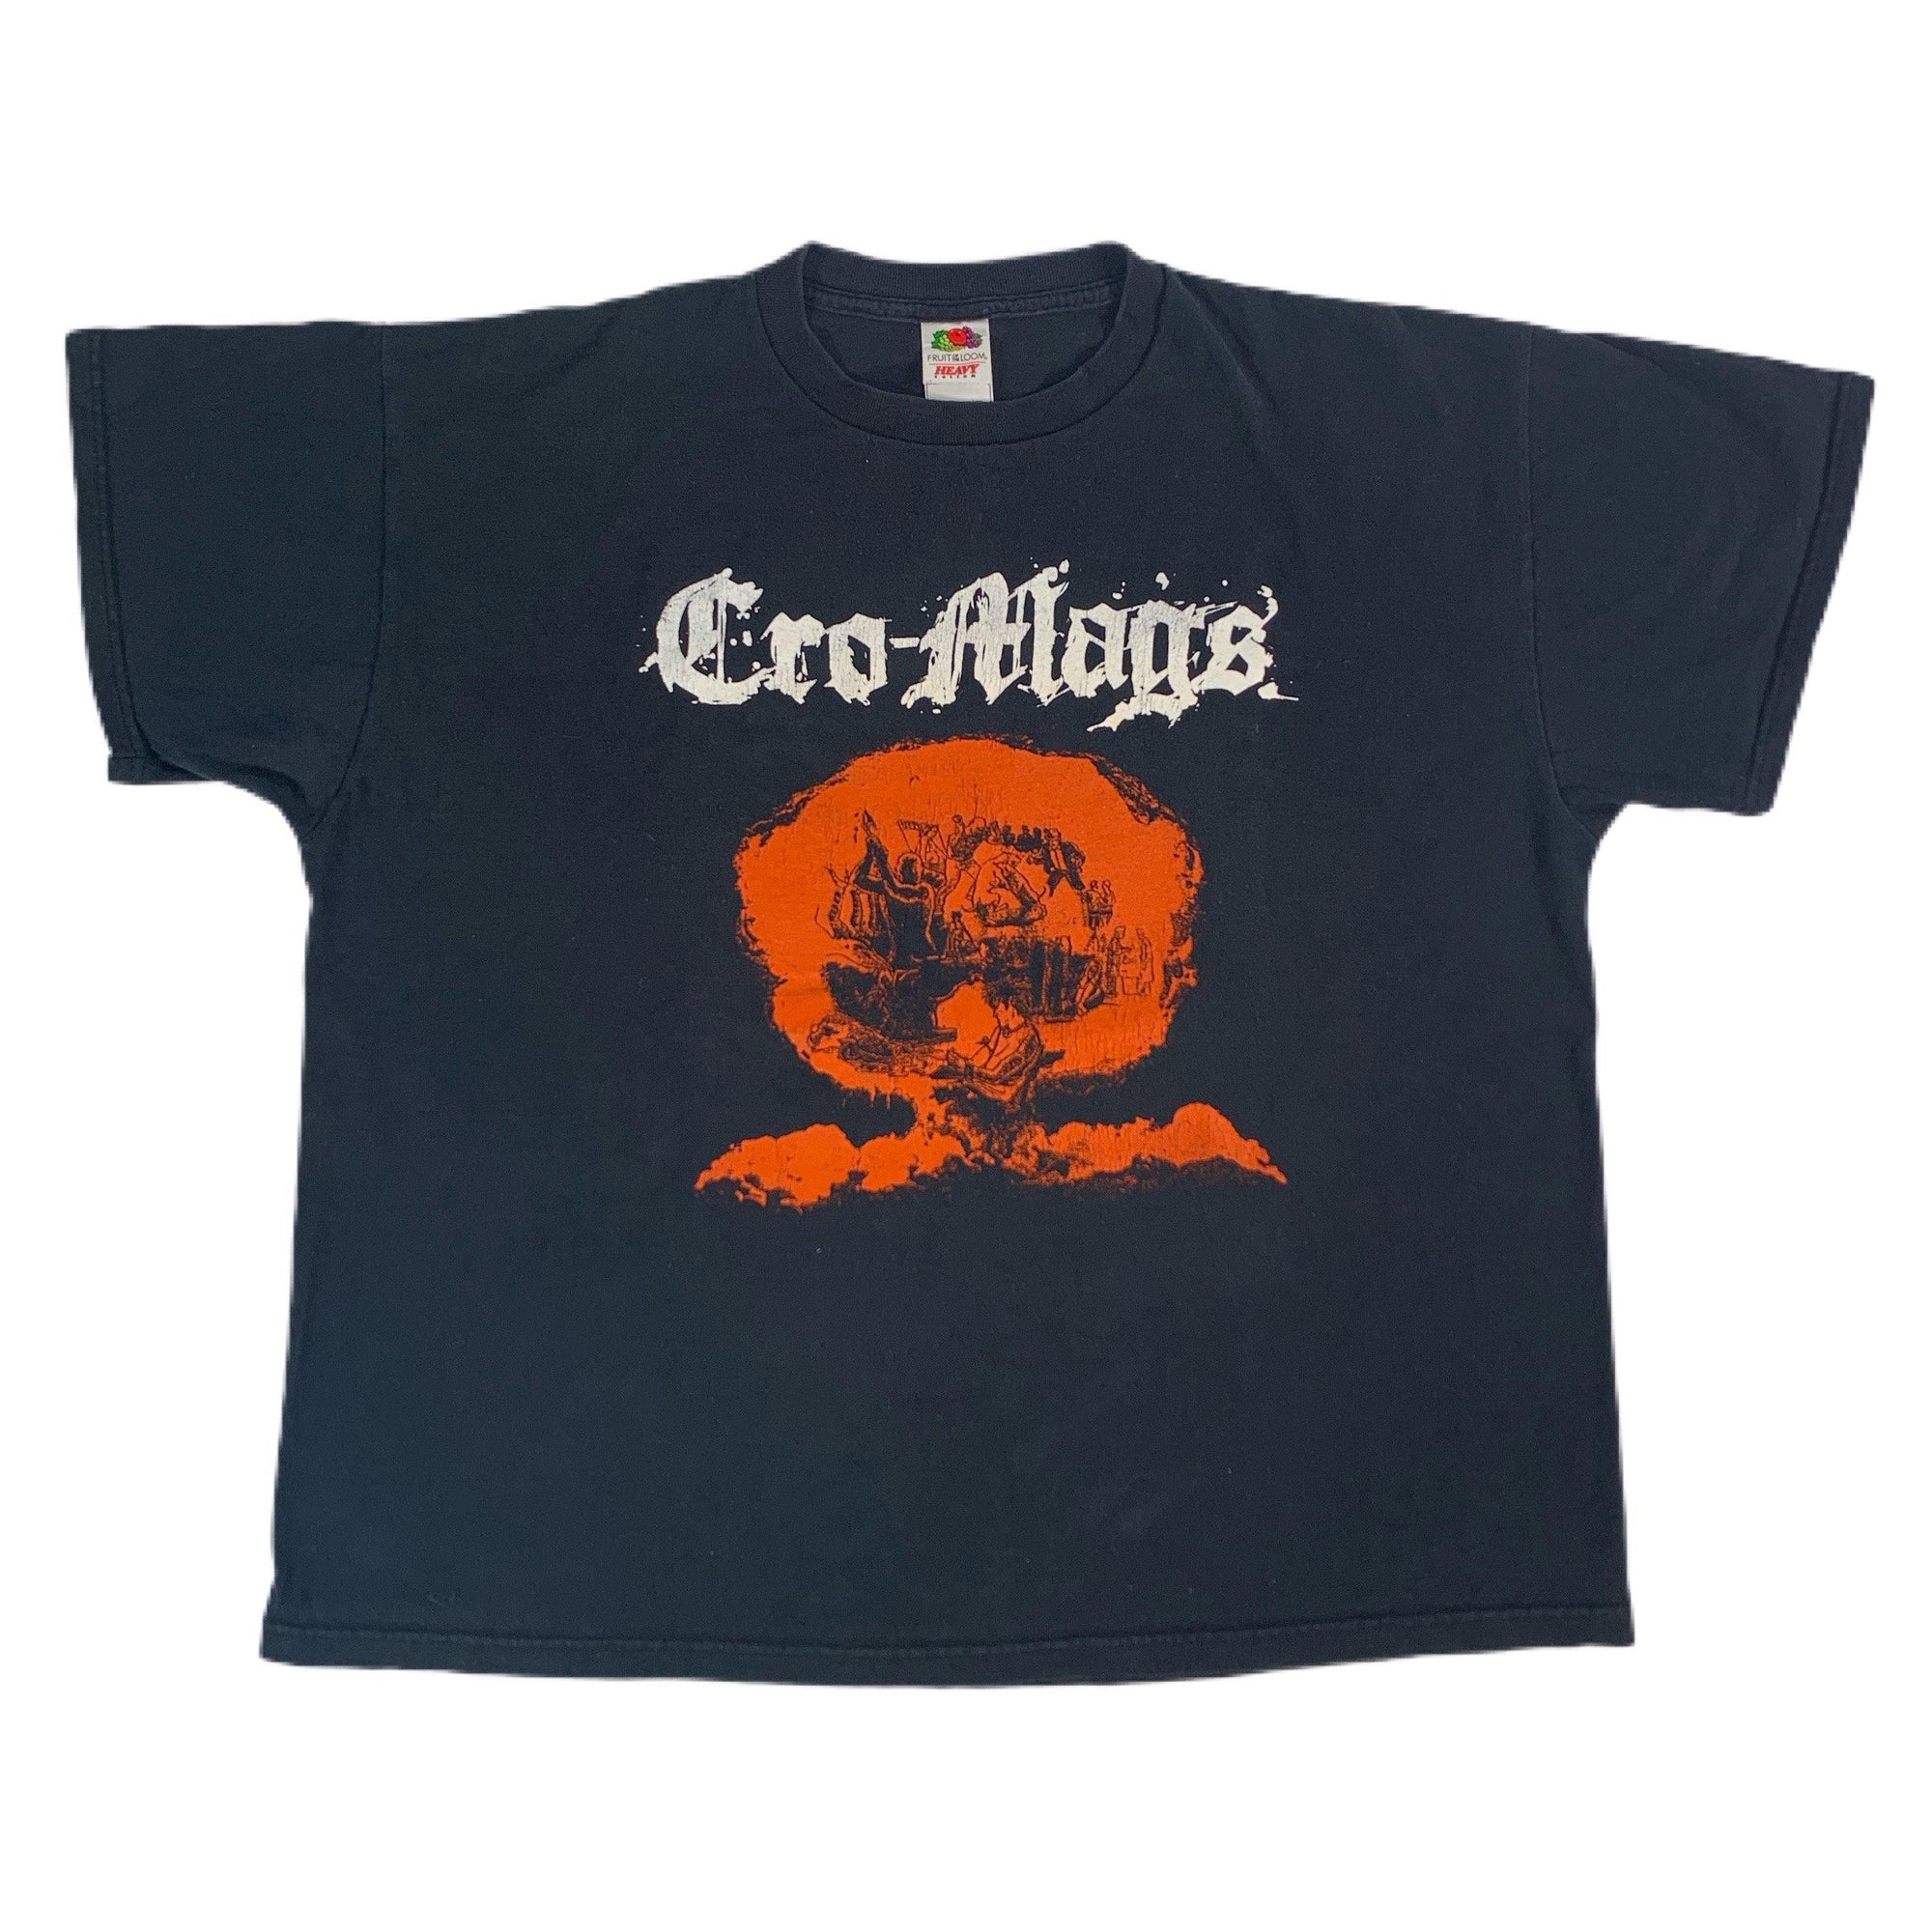 Vintage Cro-Mags "Overpower Overcome" T-Shirt - jointcustodydc